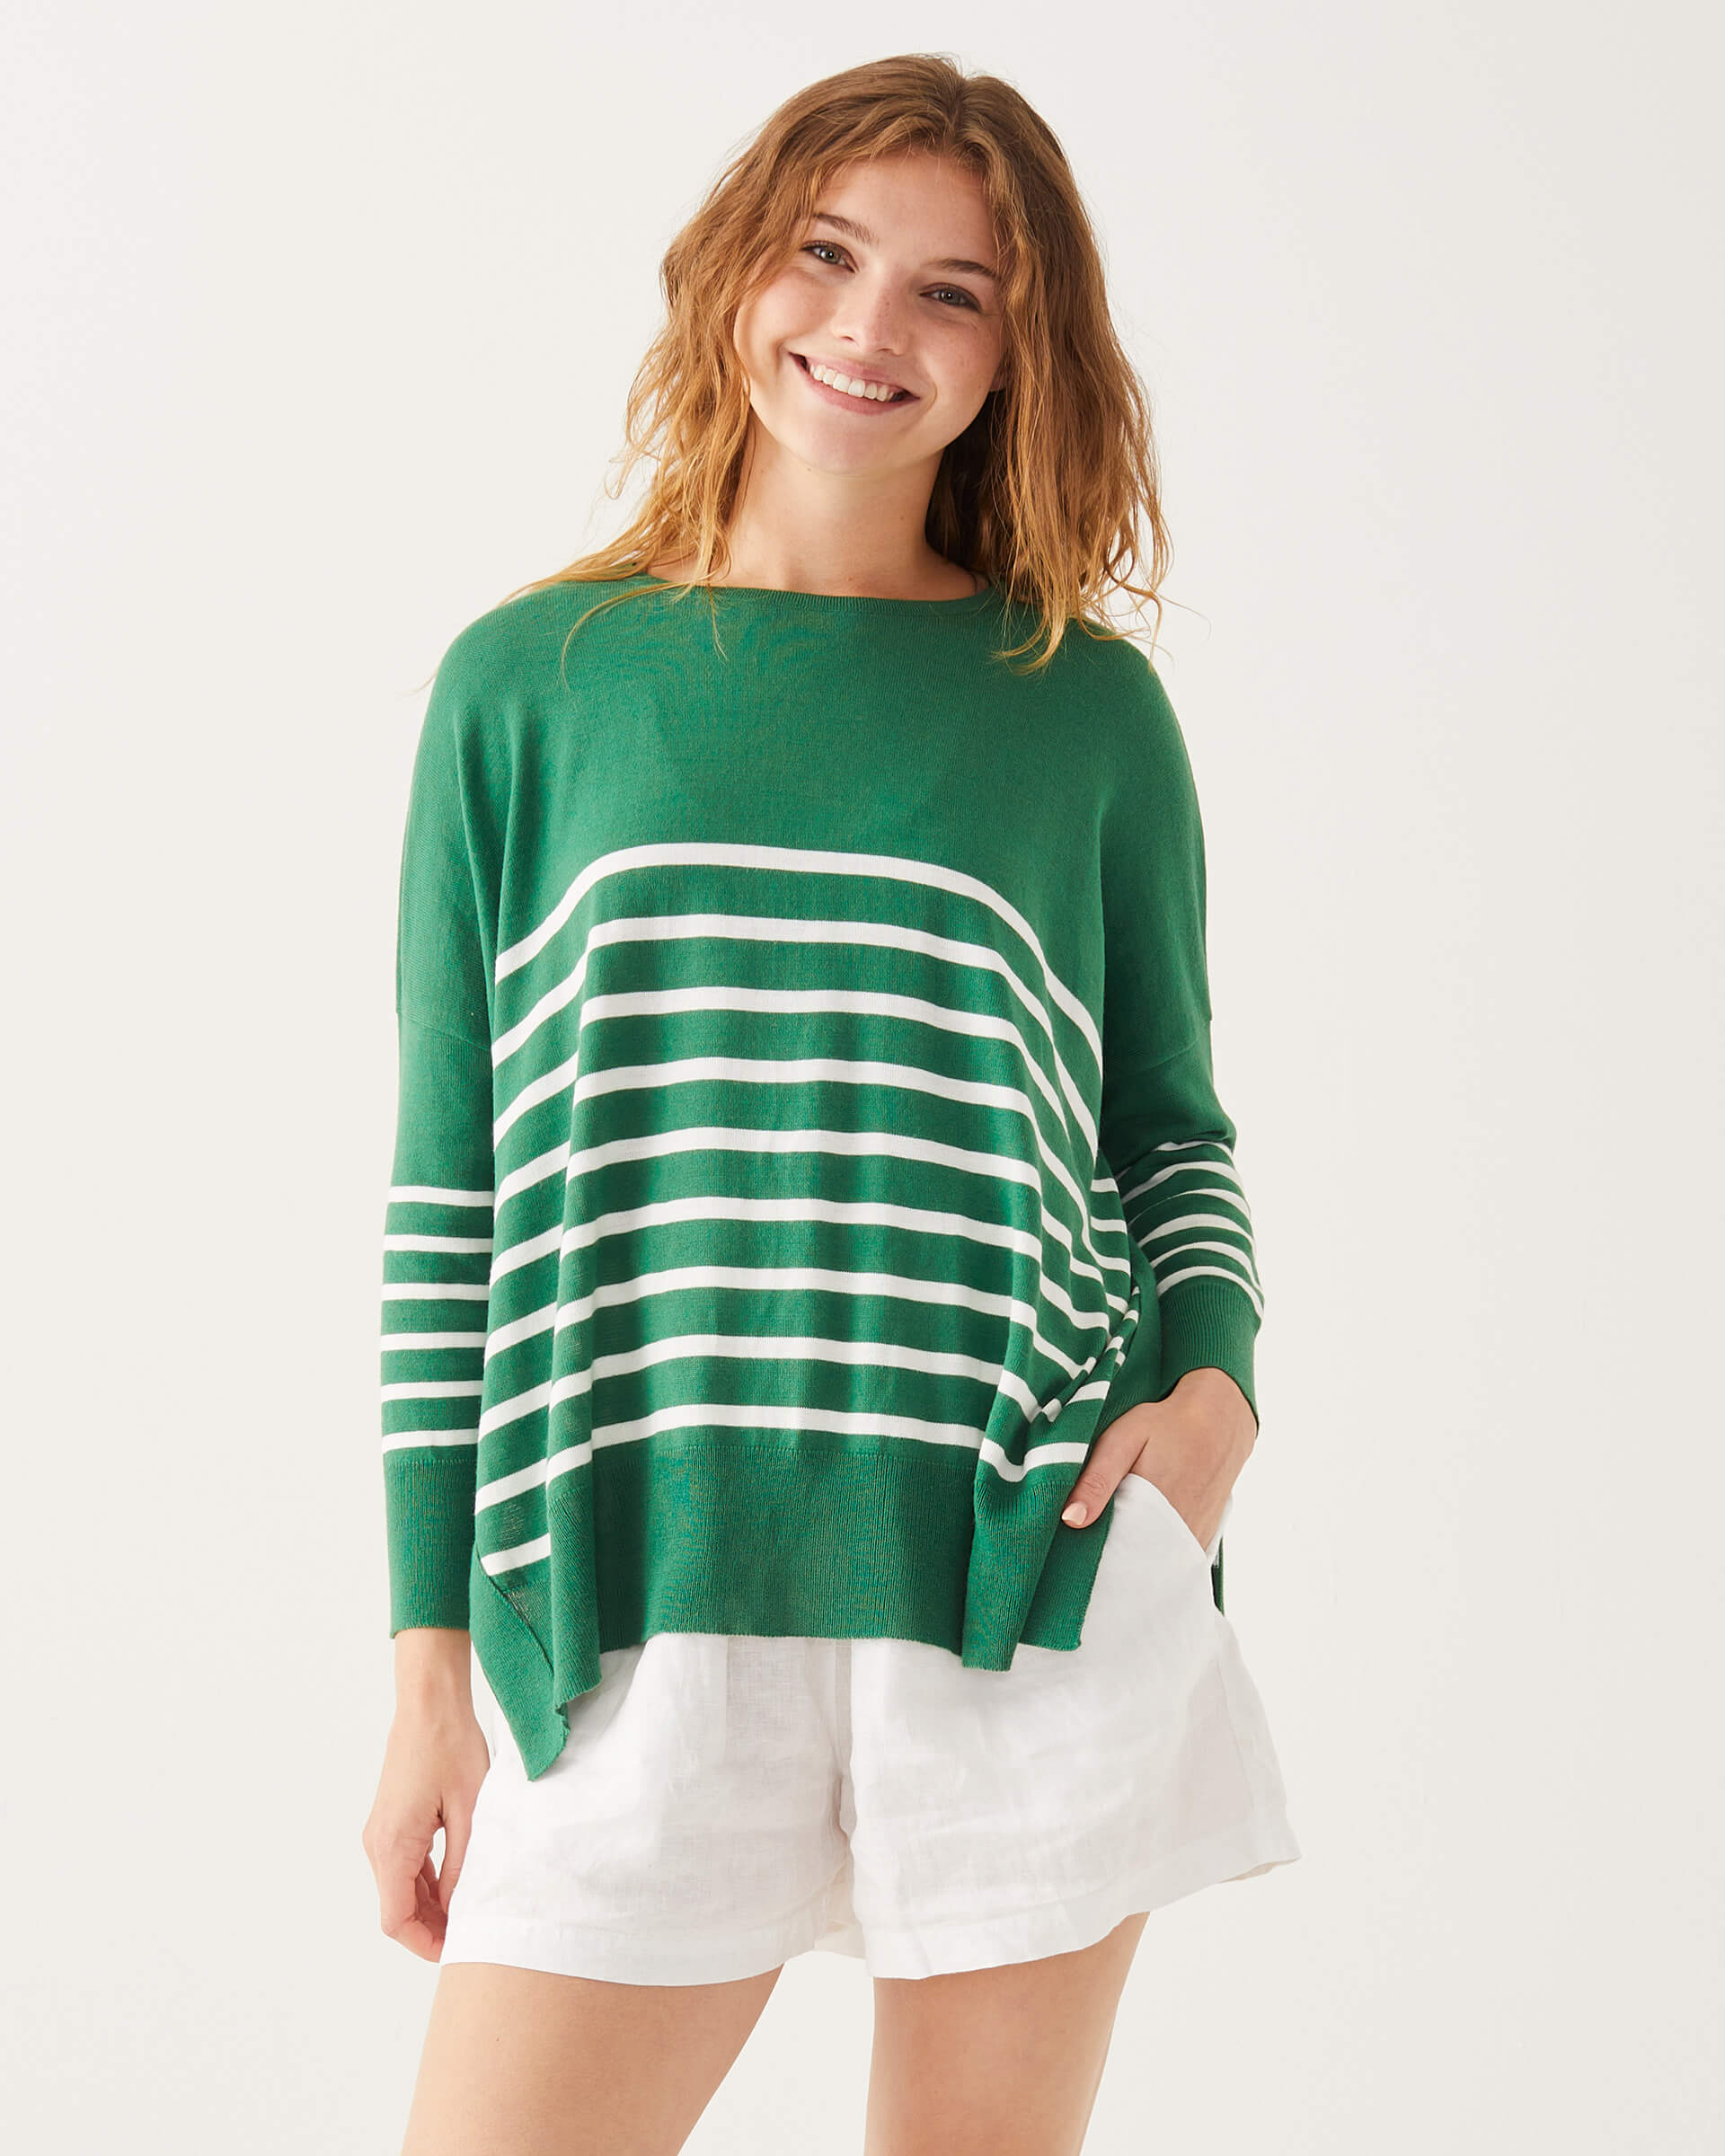 female wearing green and white striped sweater standing on a white background 